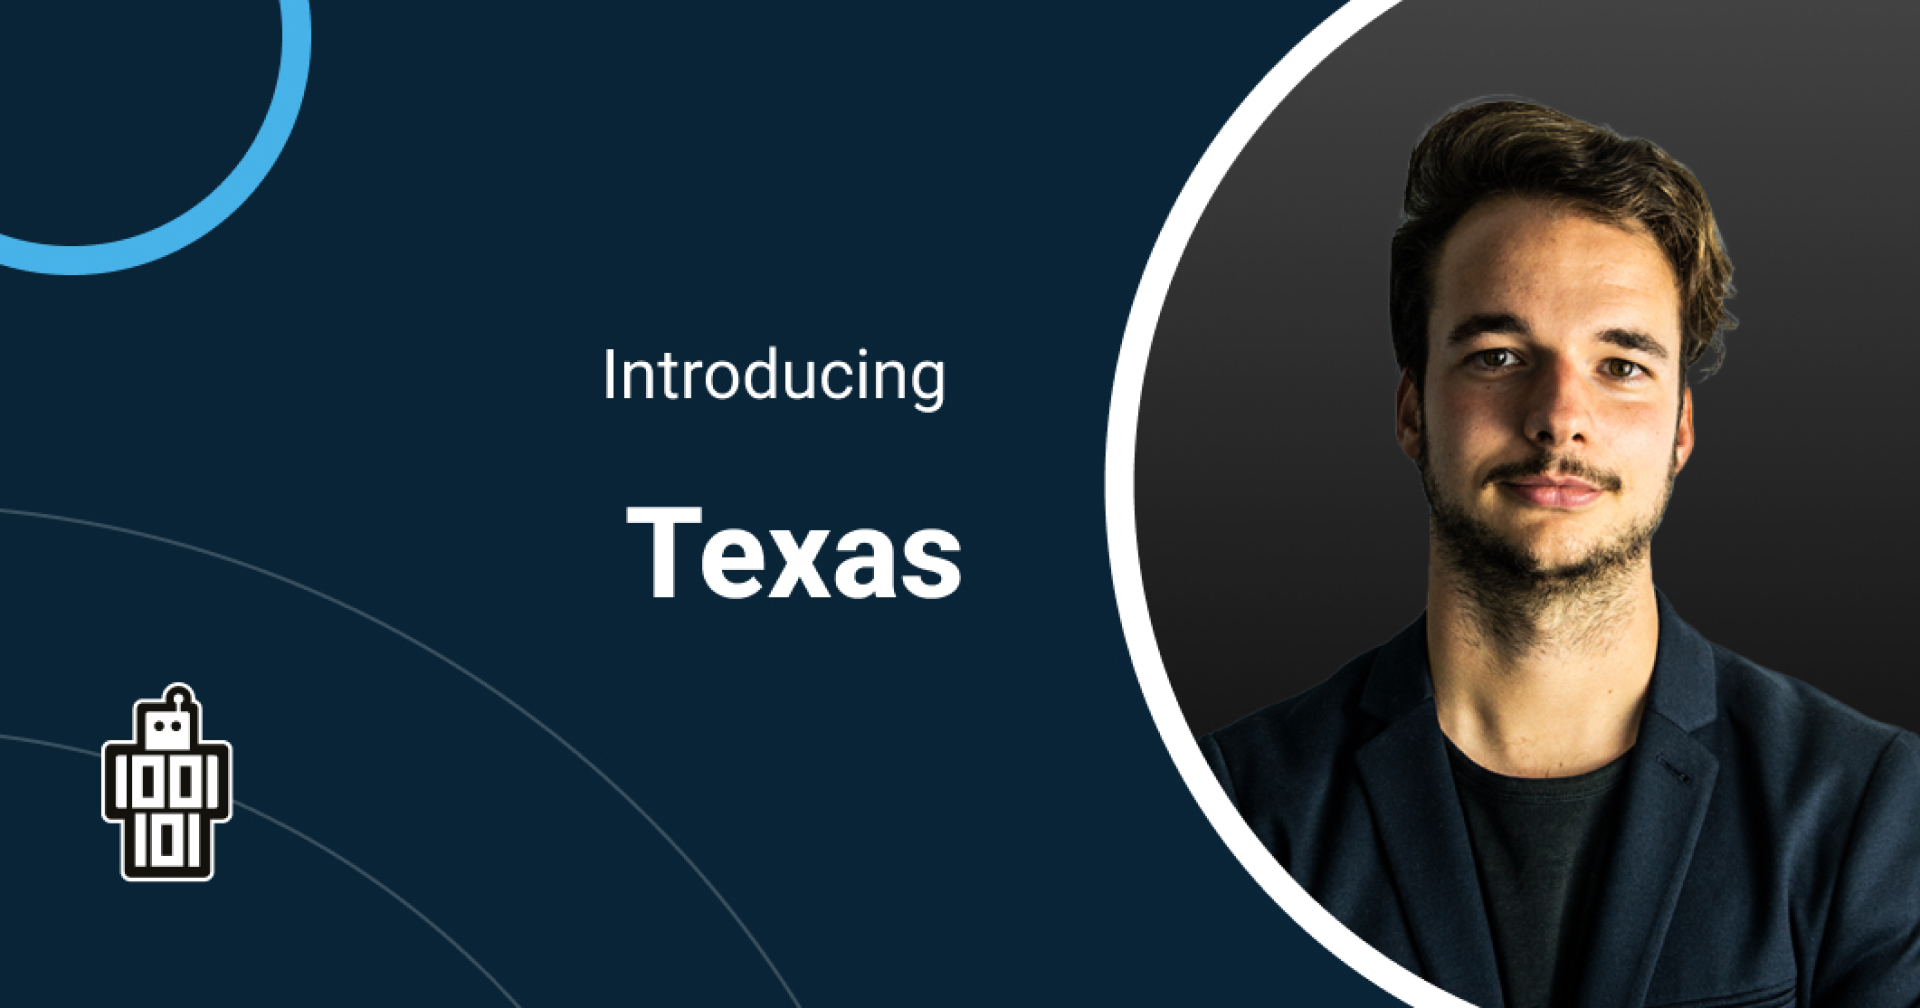 Meet Texas! - We would like to introduce you to our newest team member Texas